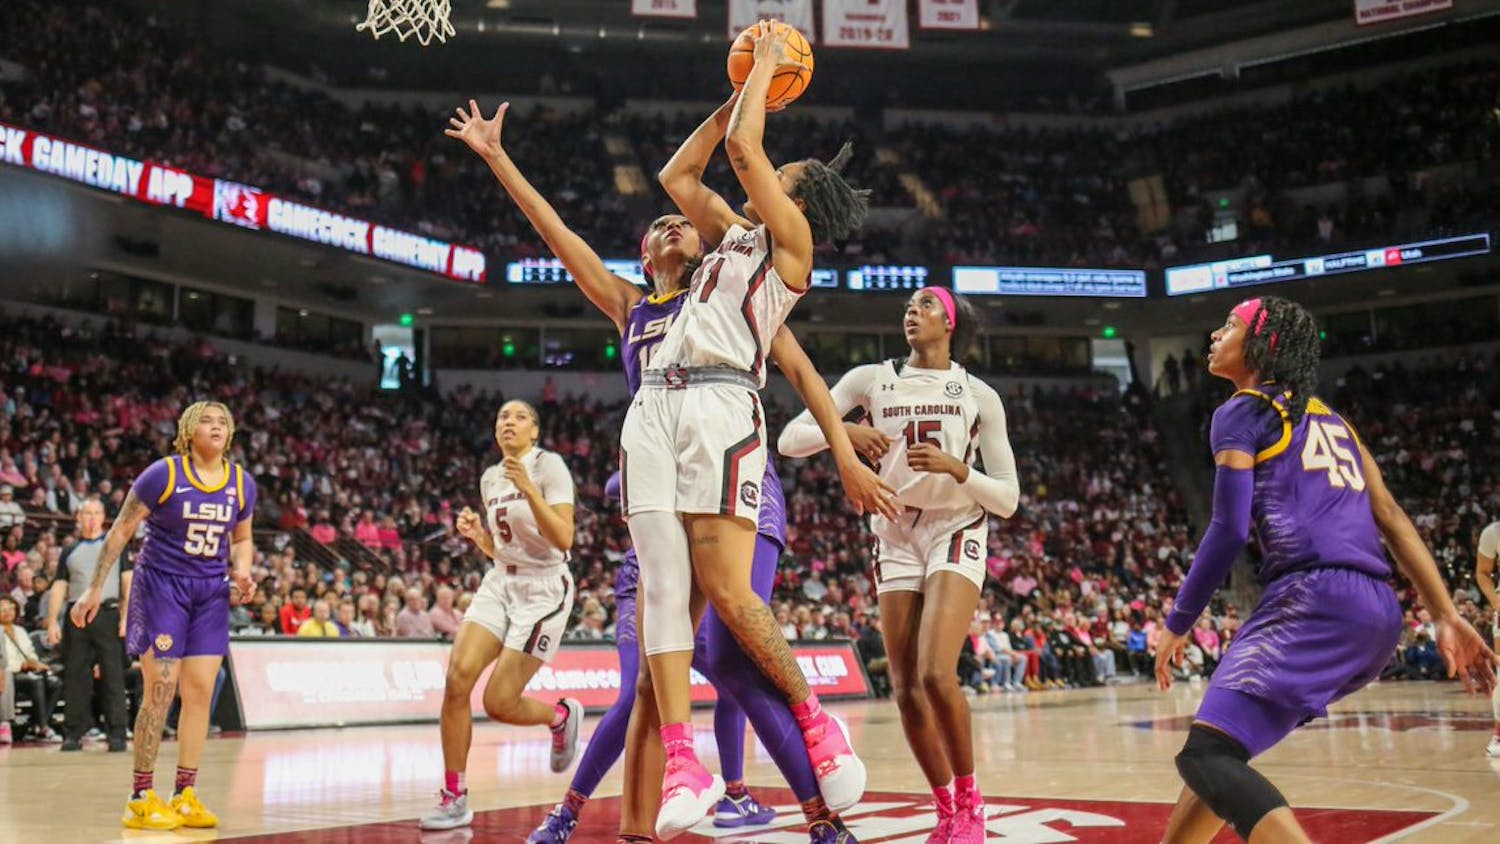 File — Graduate student guard Kierra Fletcher sets up for a shot during South Carolina’s game against LSU at Colonial Life Arena on Feb. 12, 2023. The Gamecocks beat the Tigers 88-64.